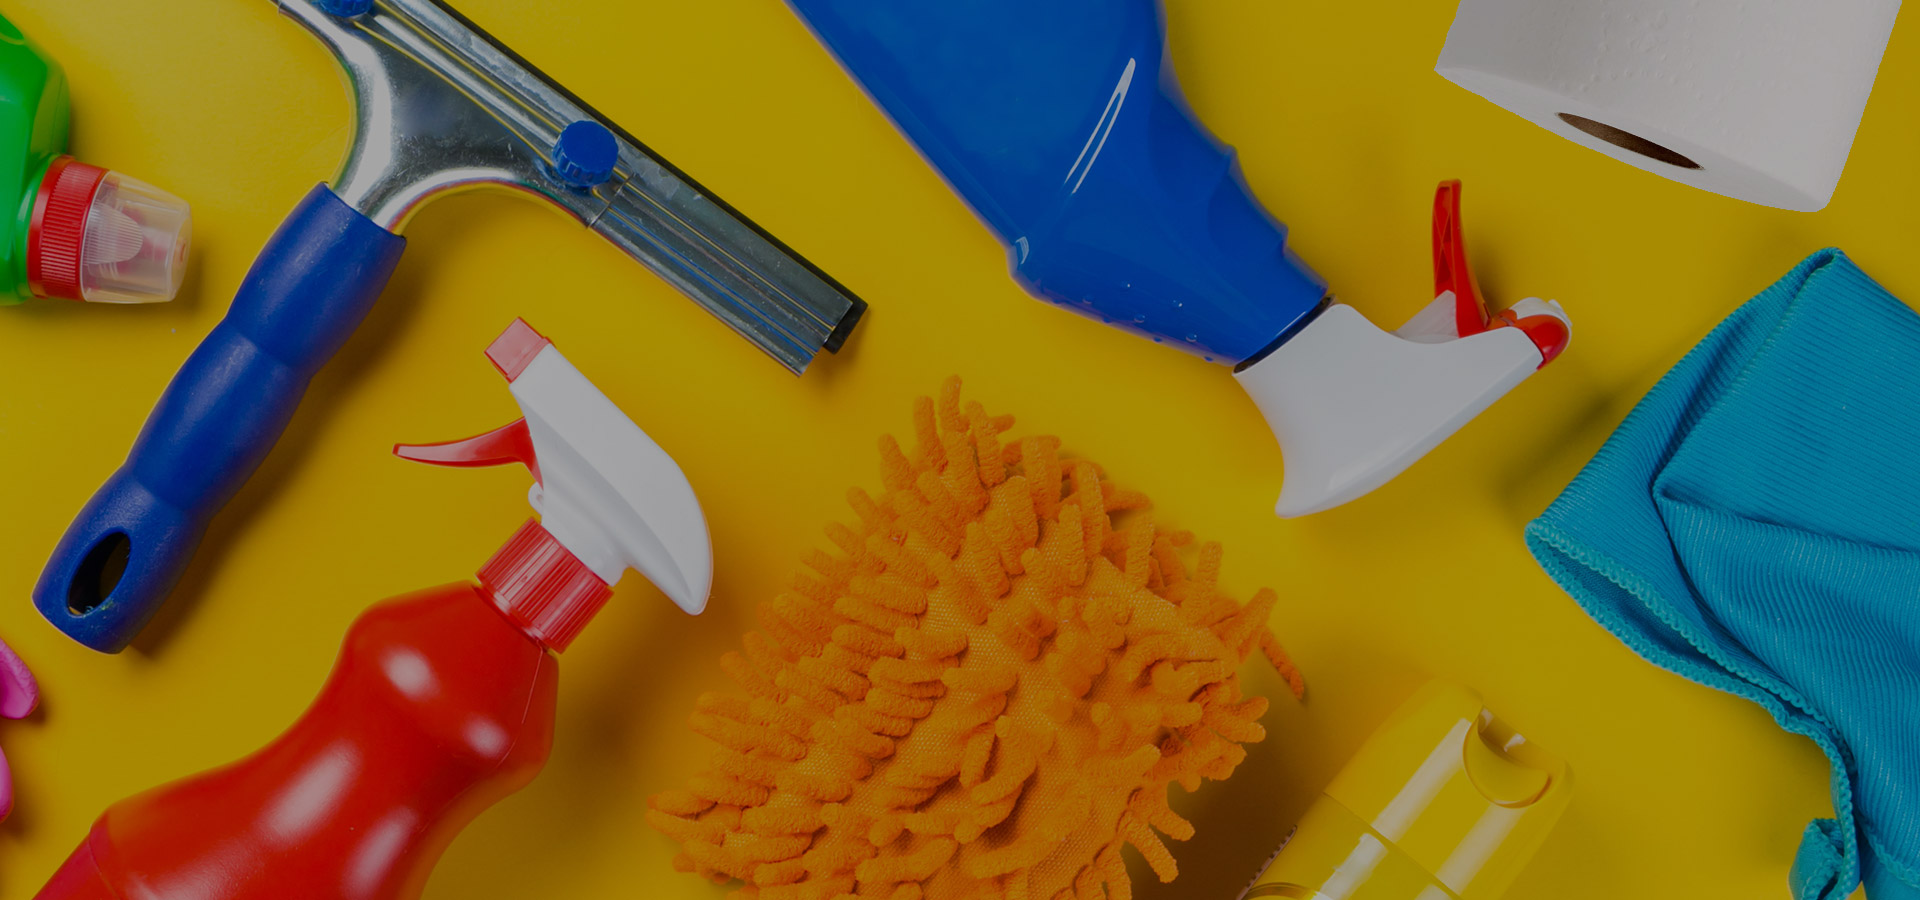 Janitor header background products